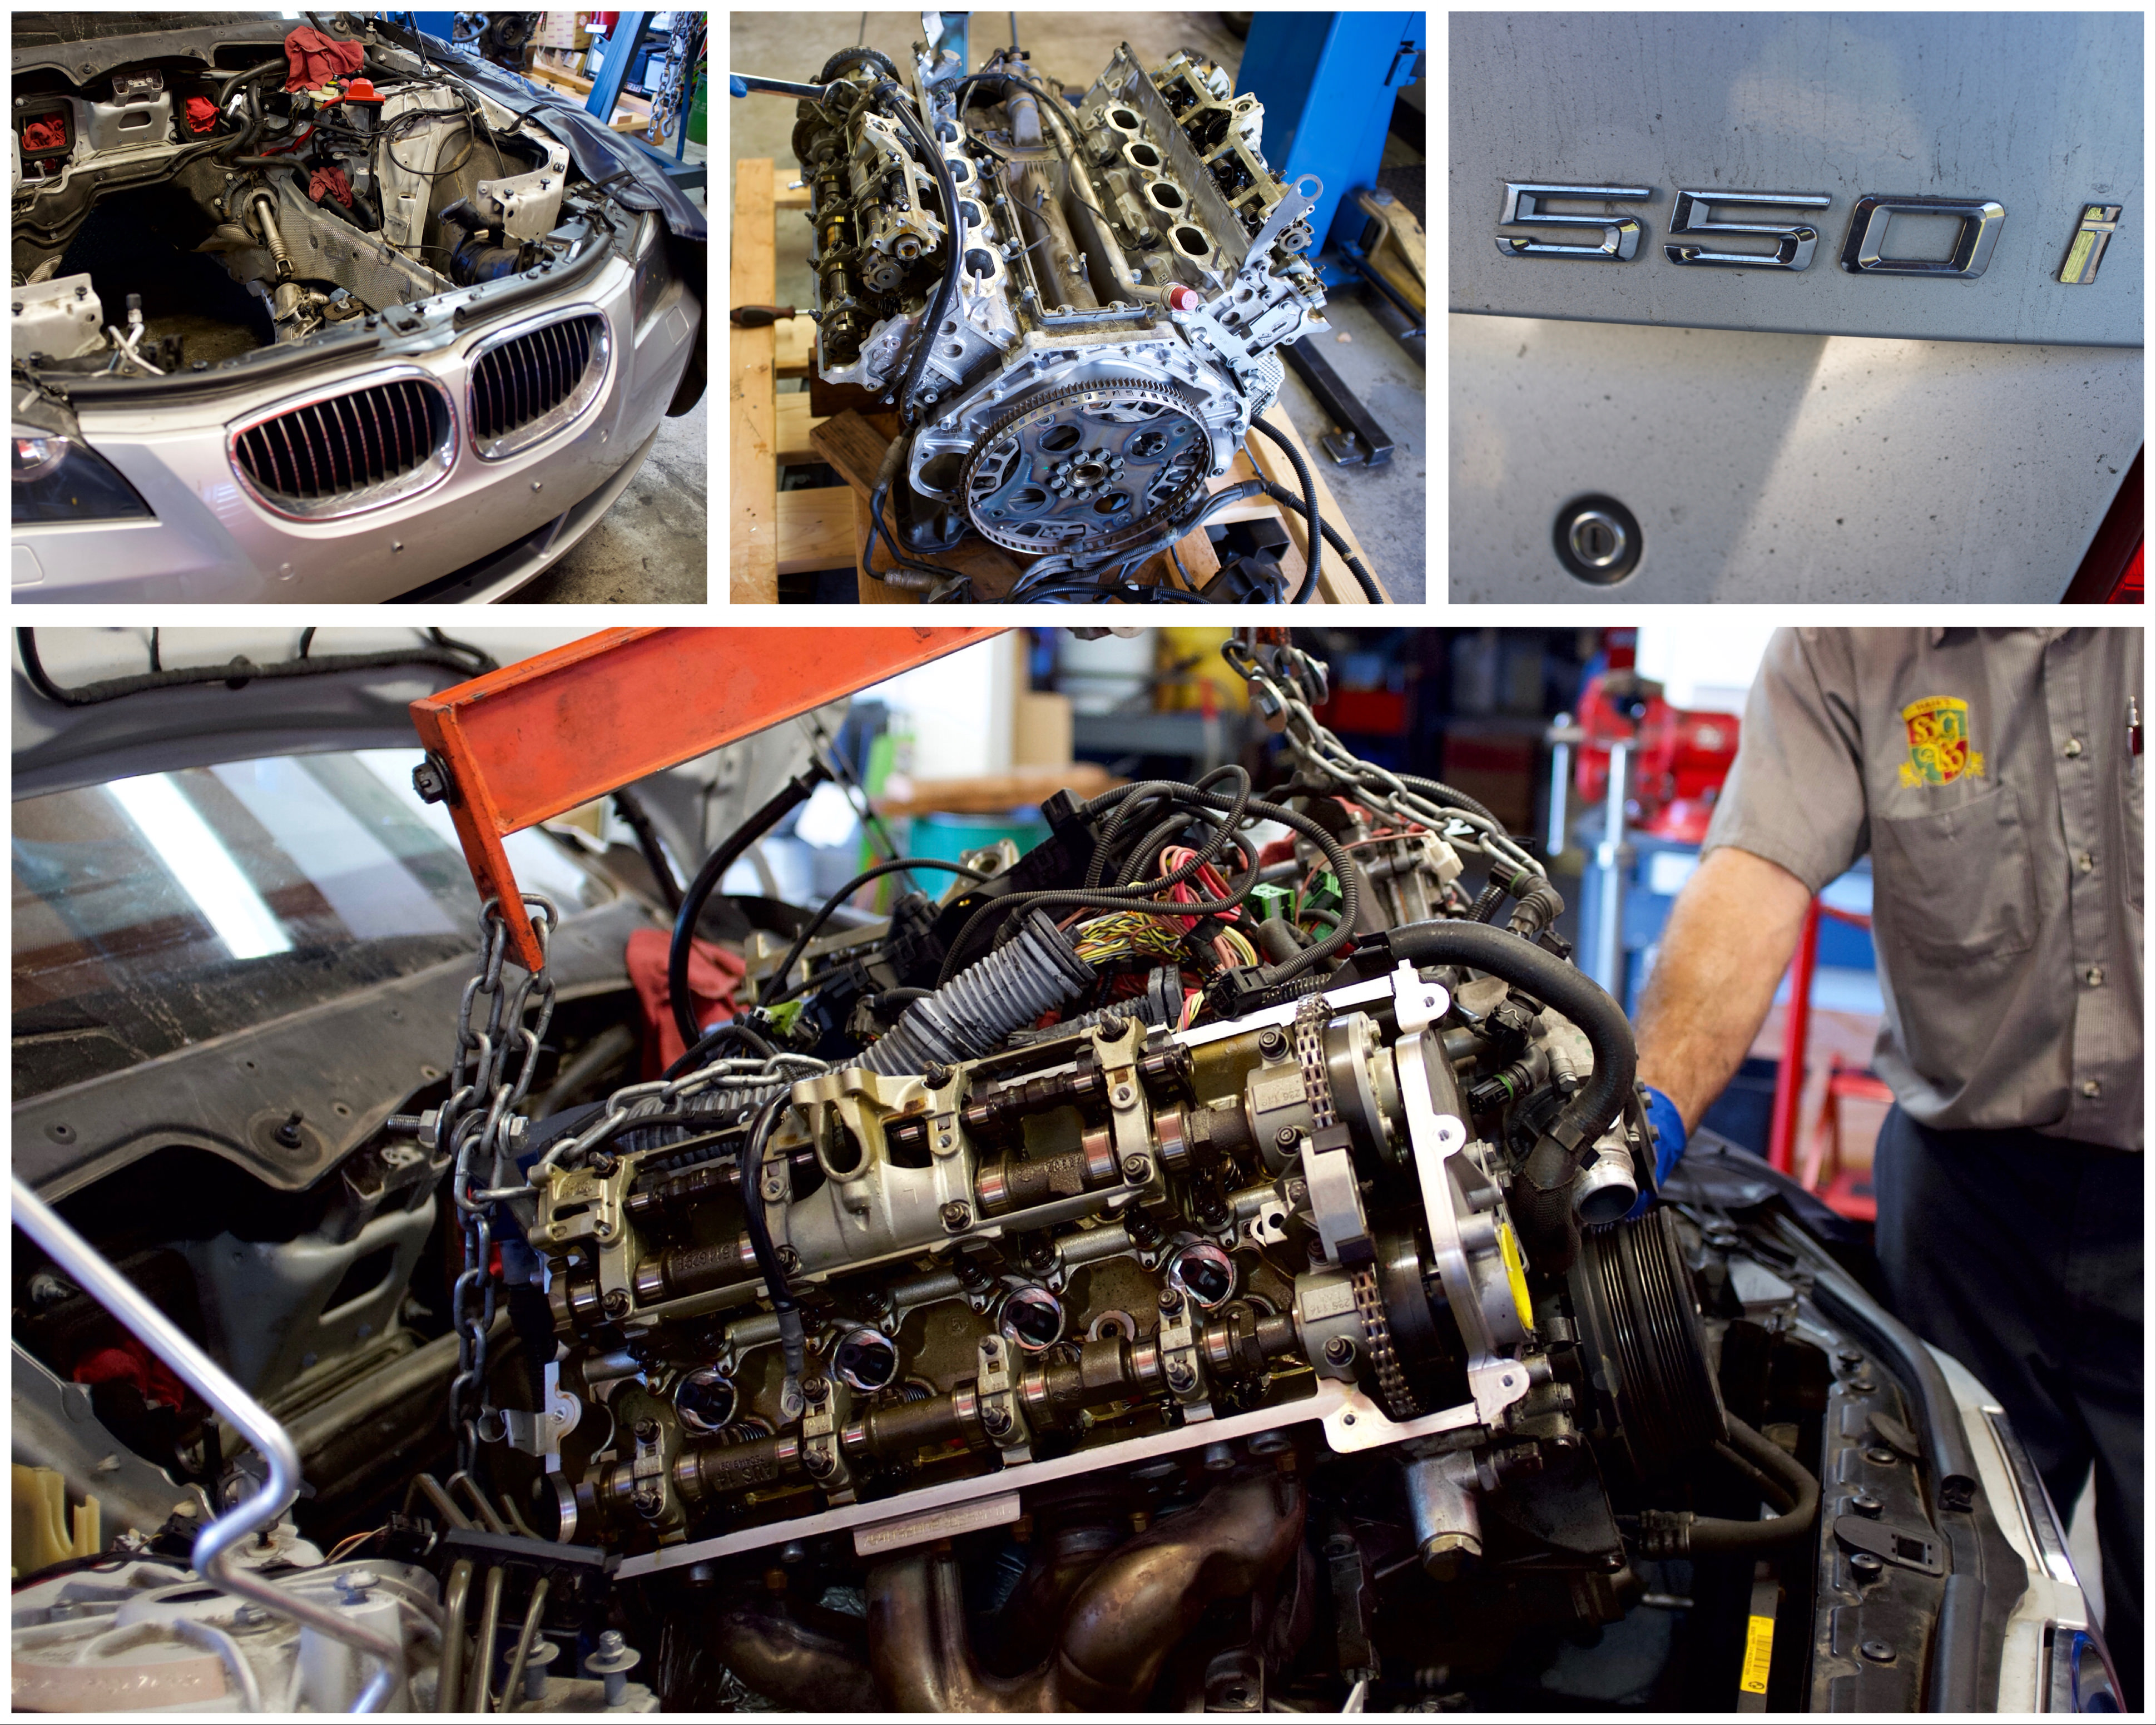 Removal of BMW engine at Haik's German Autohaus